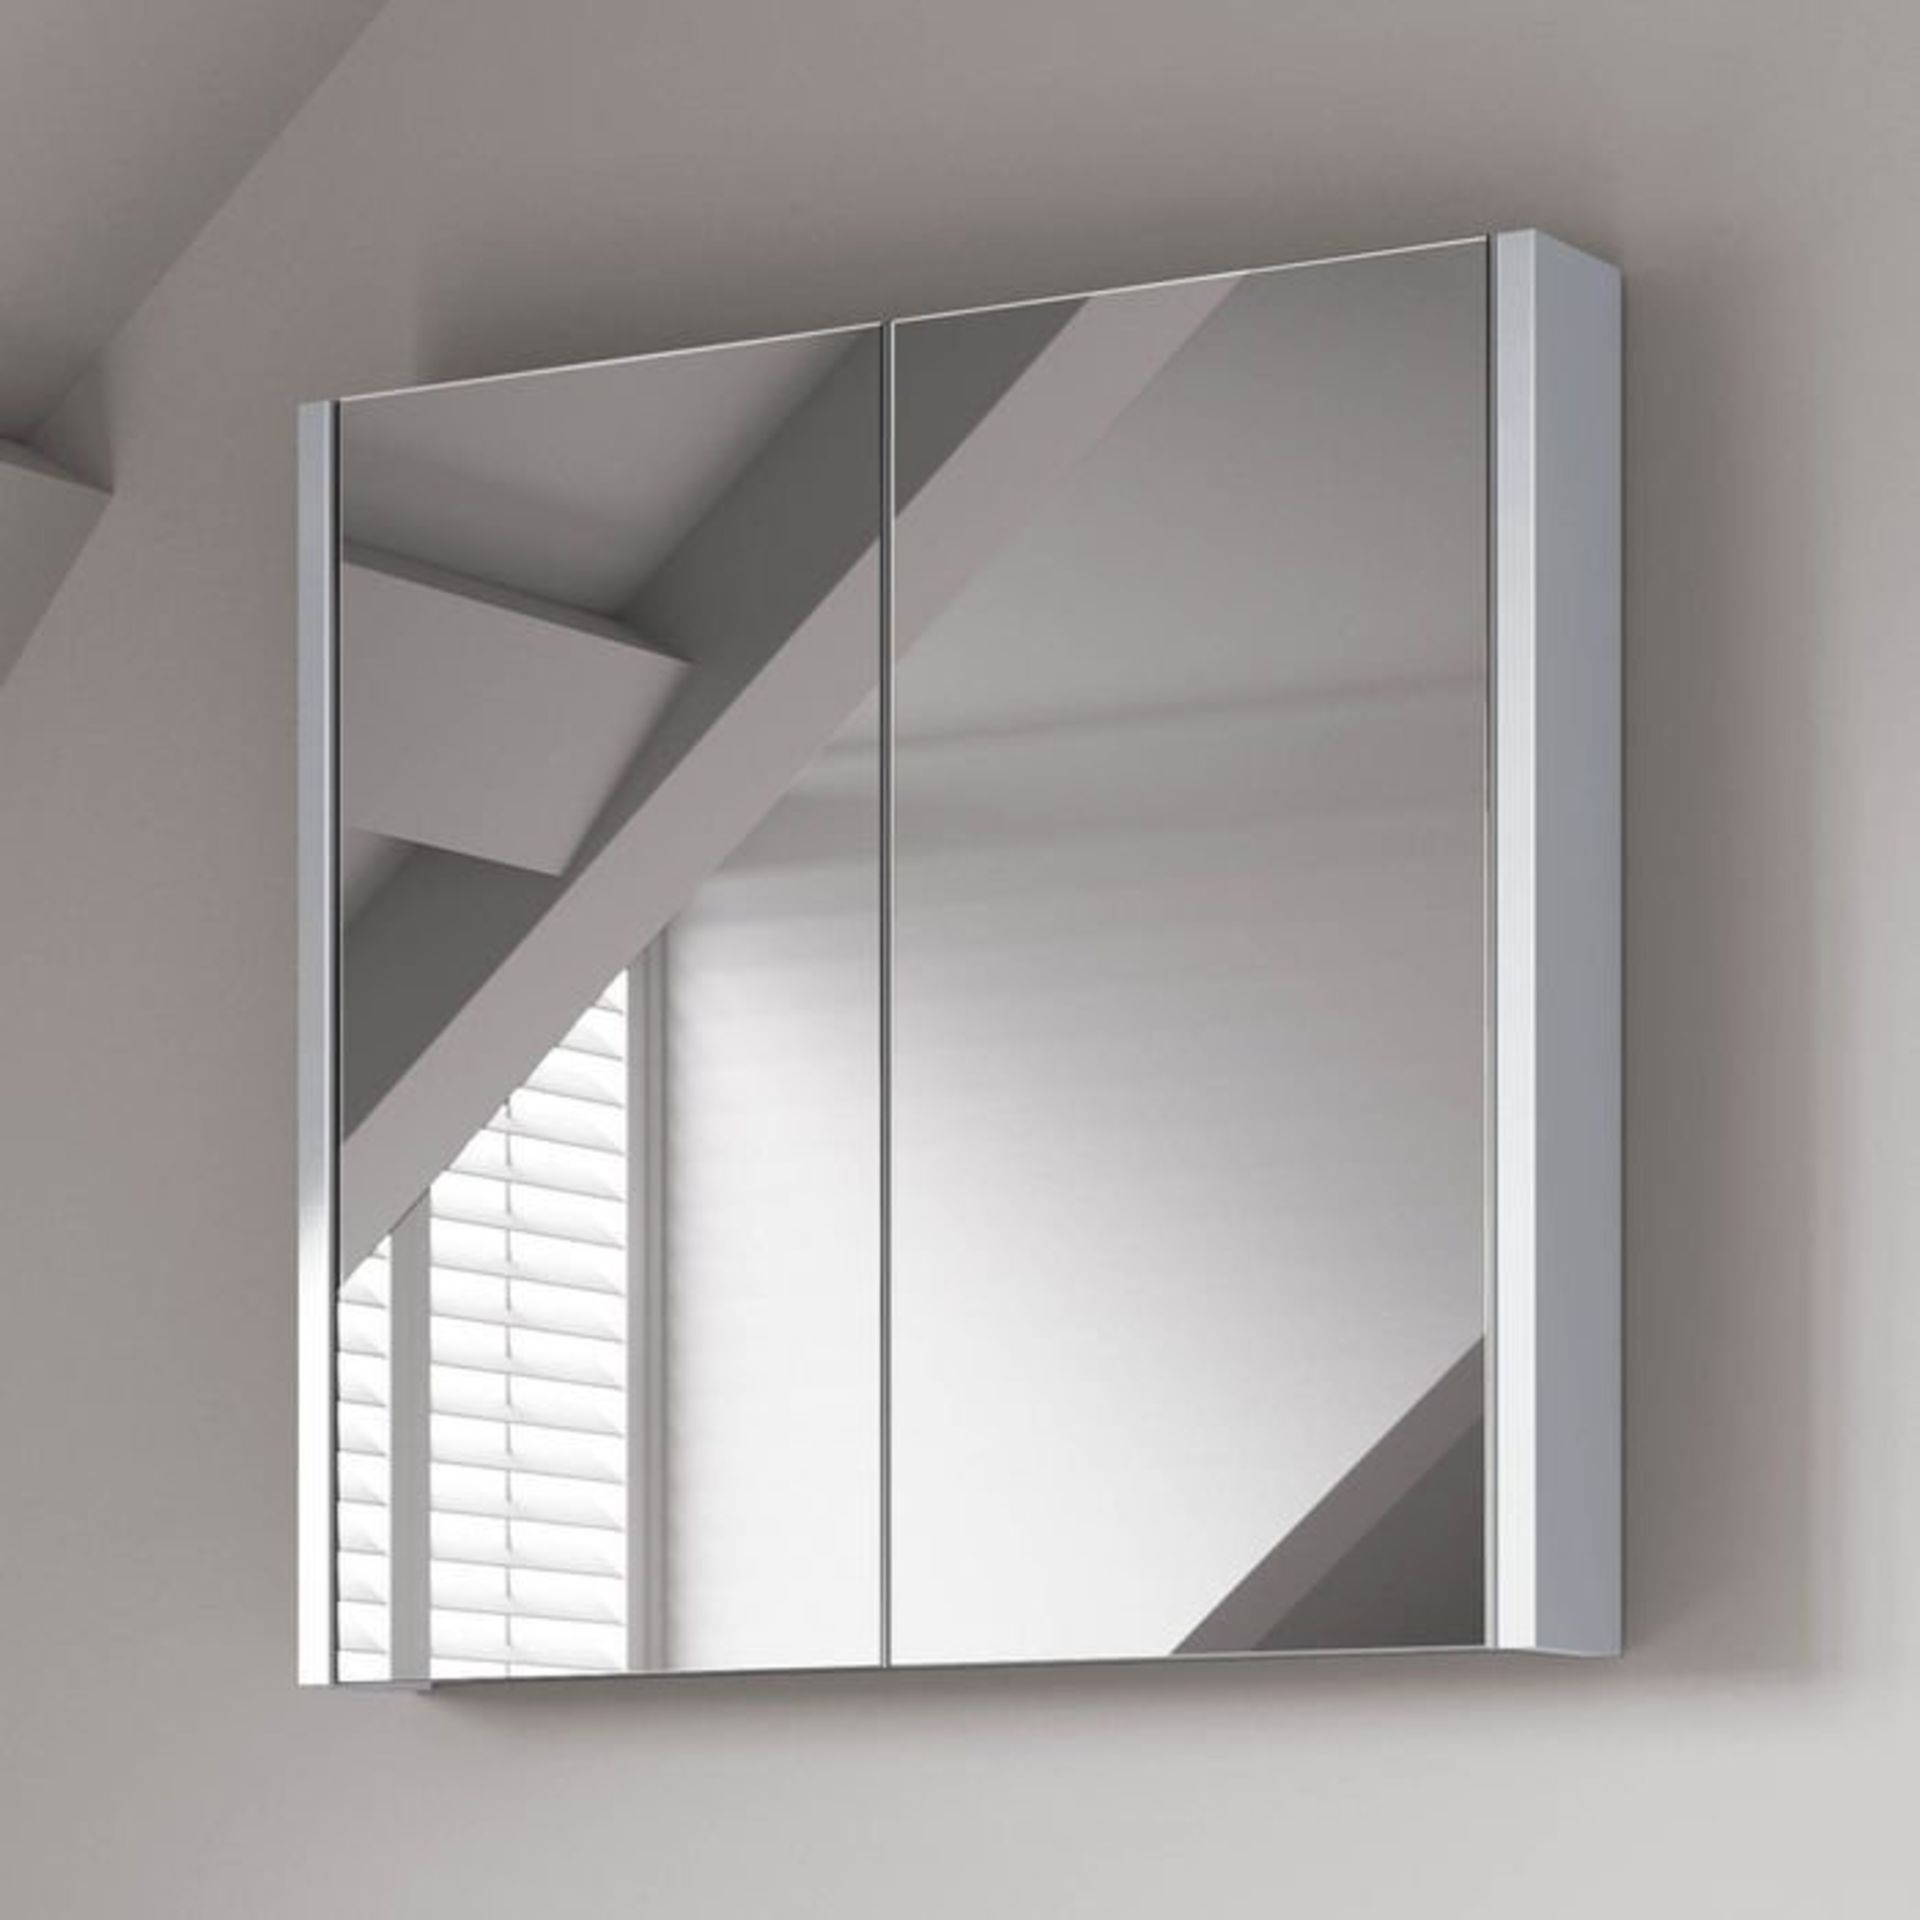 (M42) 600mm Gloss White Double Door Mirror Cabinet. RRP £274.99. Sleek contemporary design Double